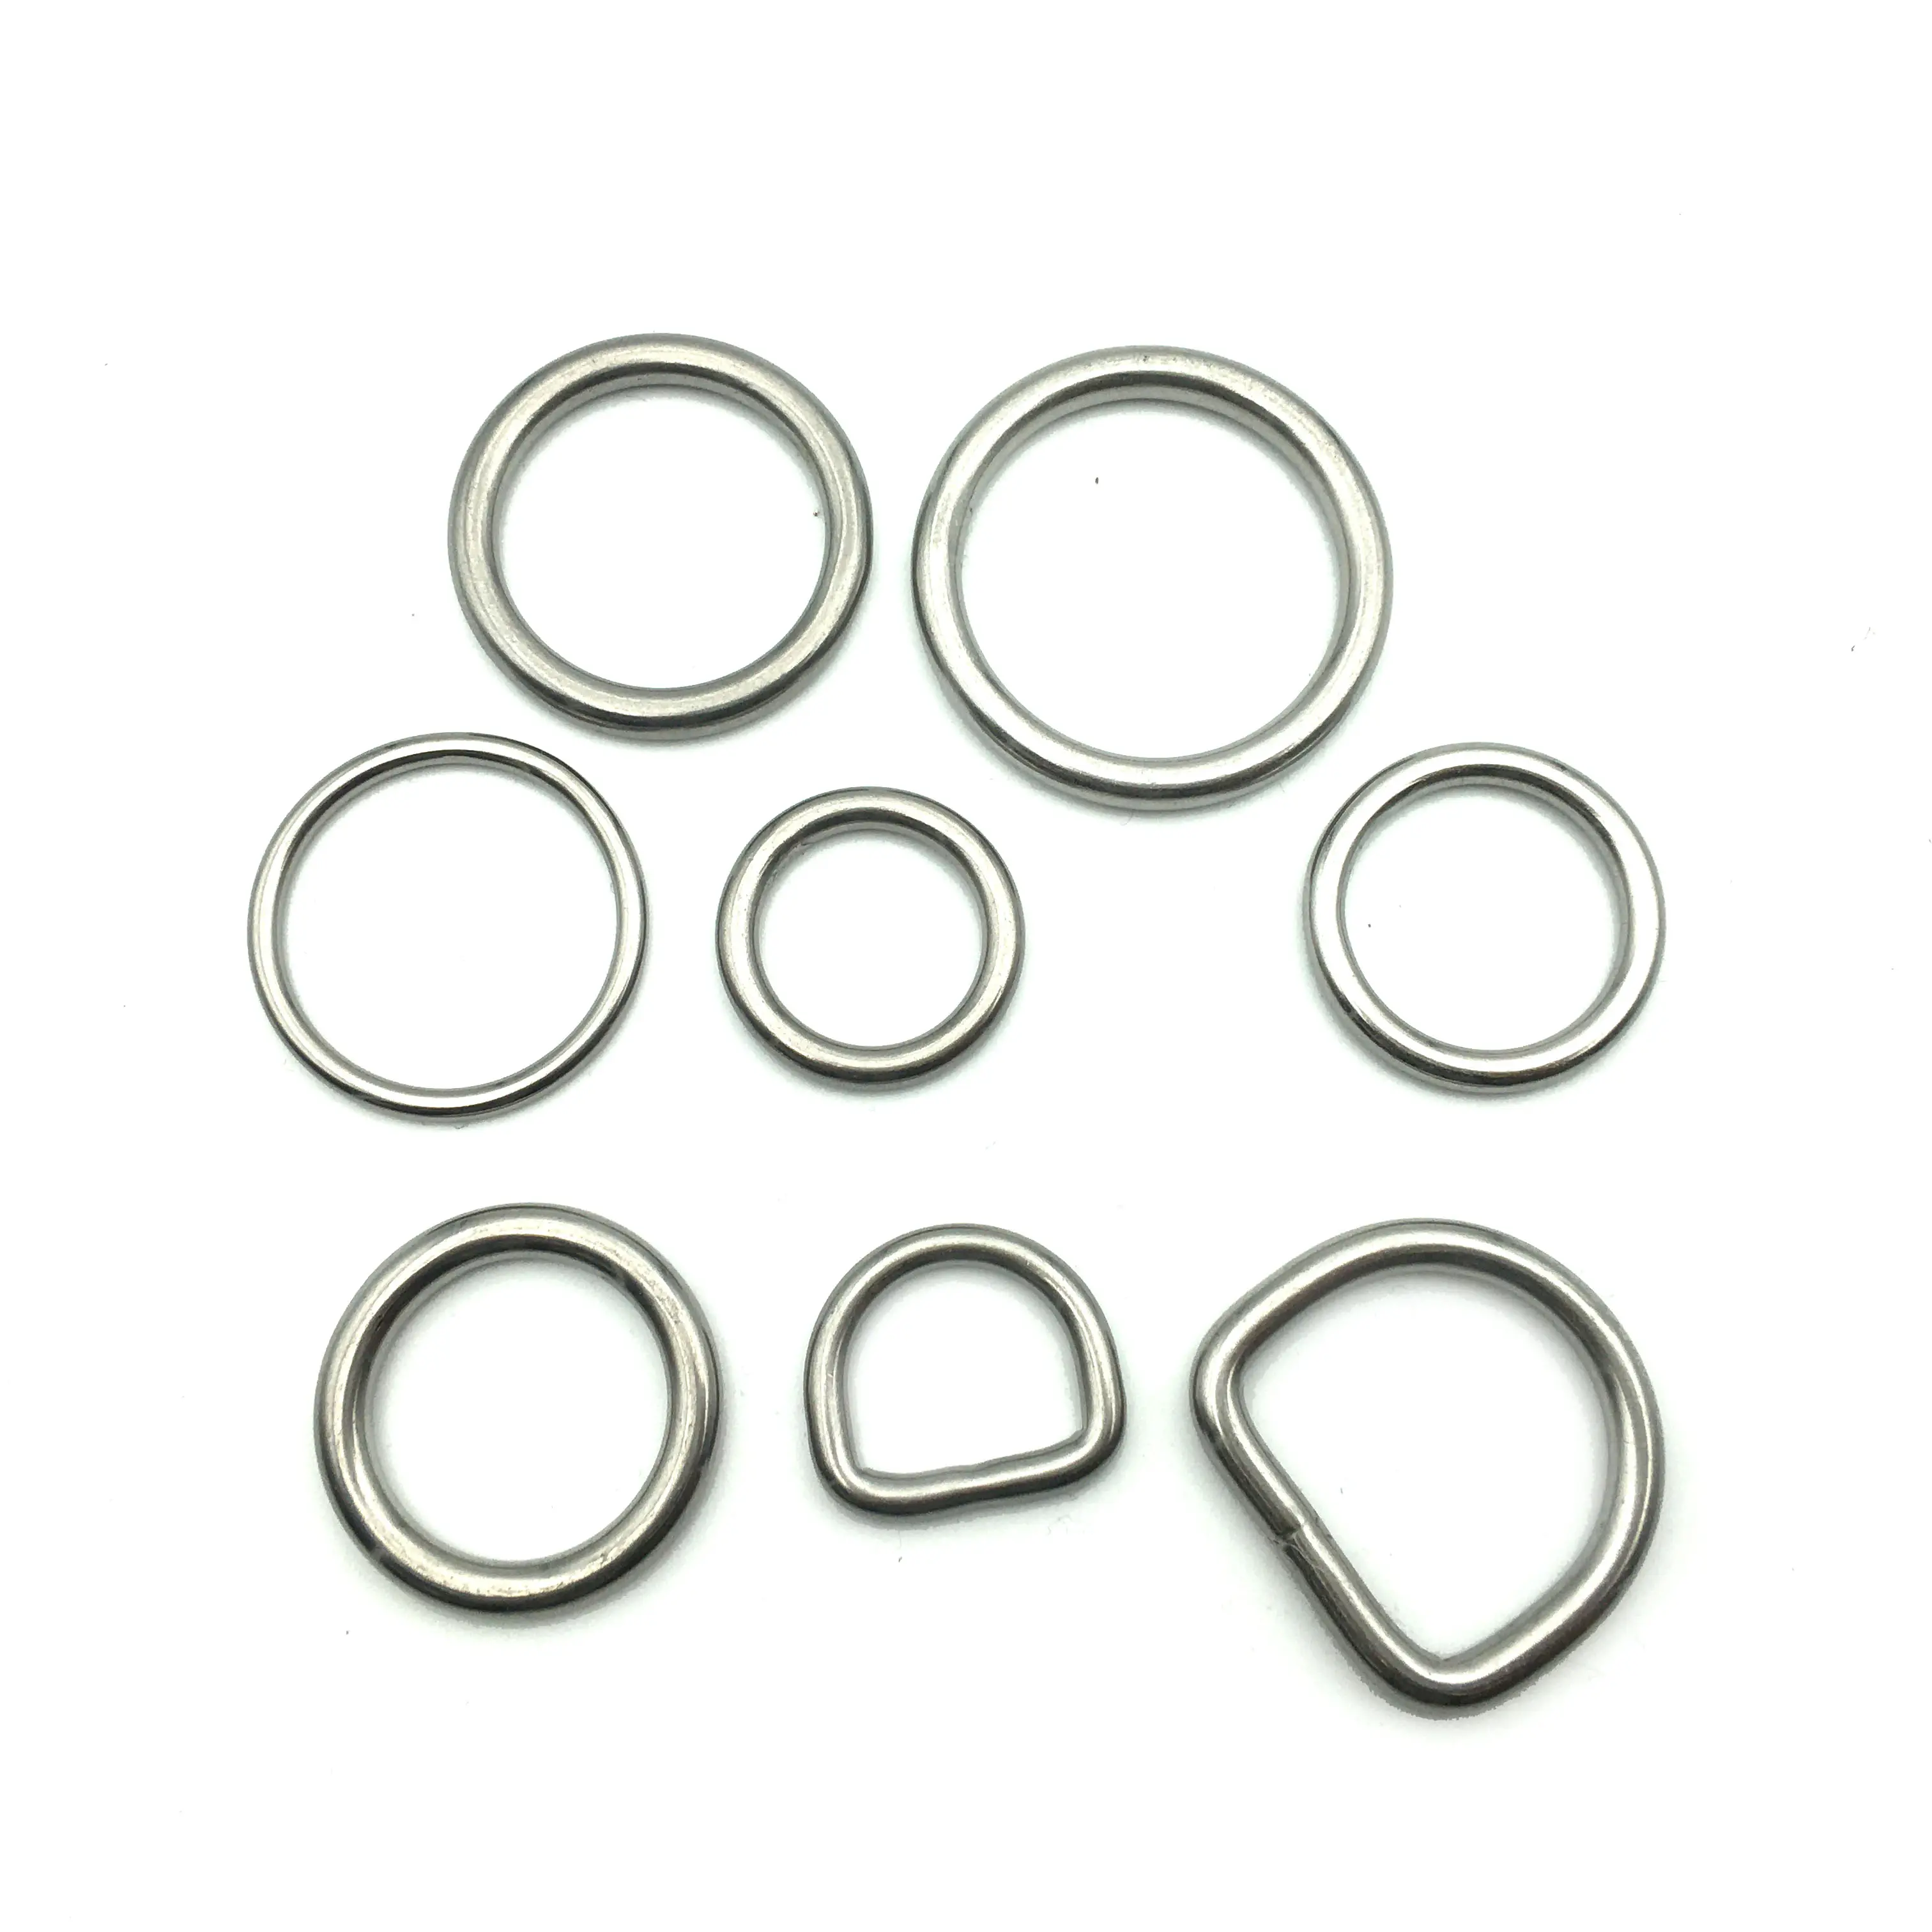 JRSGS Manufacturer Wholesale Stainless Steel 316 304 Welded Round Rings Hardware